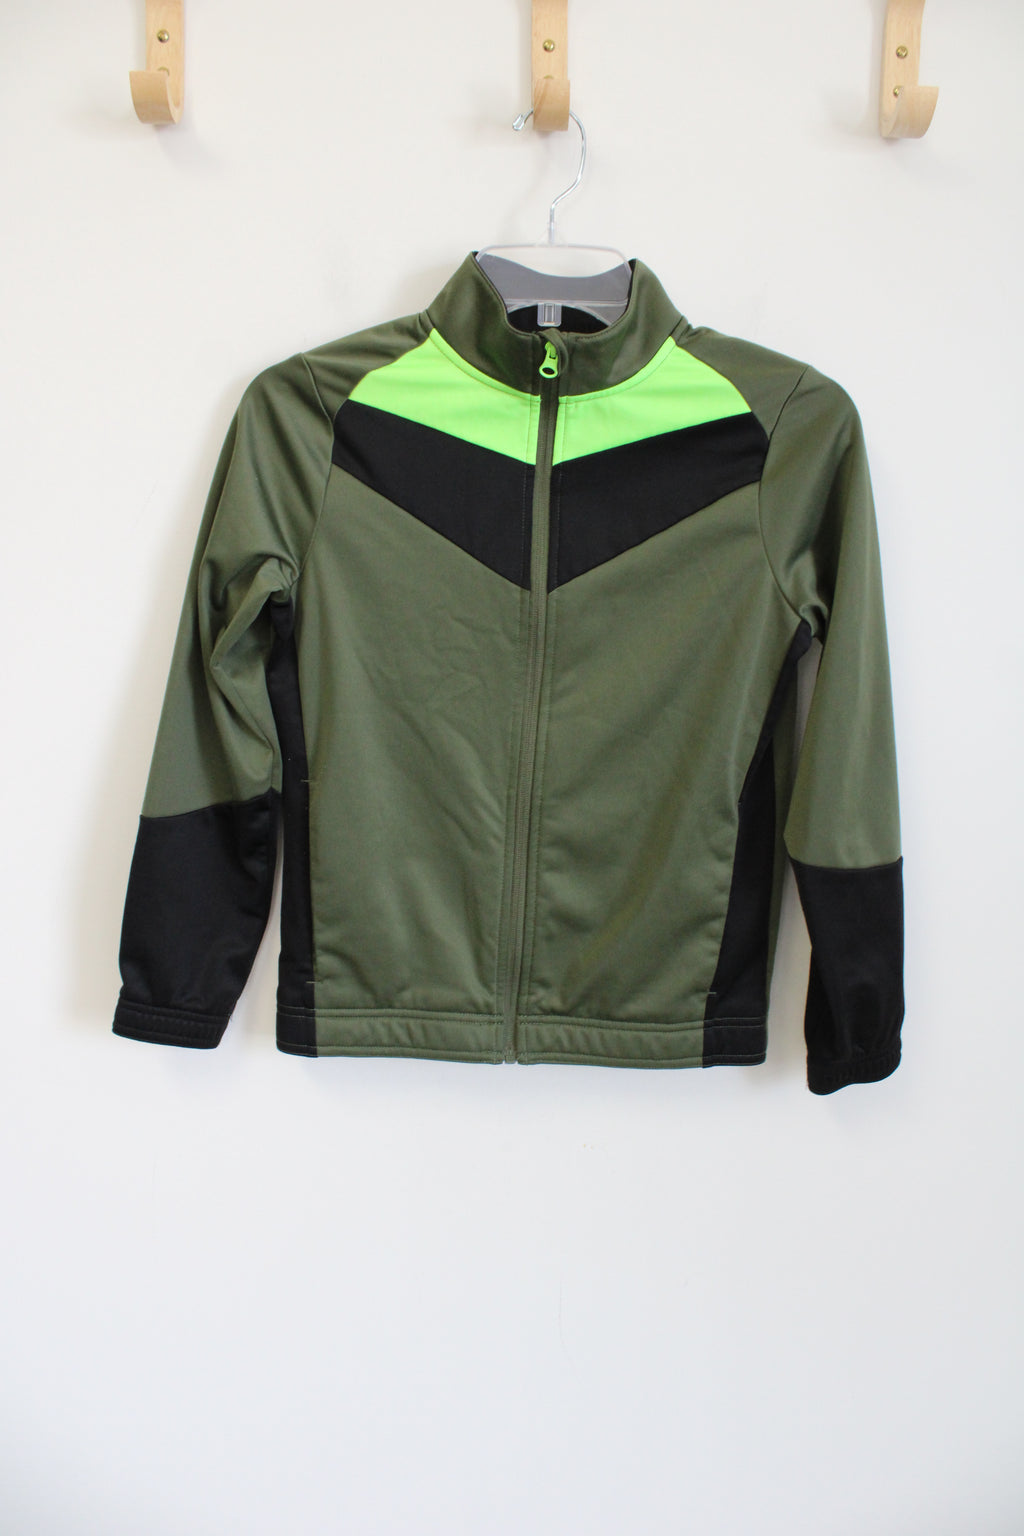 Athletic Works Green Black Fleece Lined Jacket | Youth L (10/12)